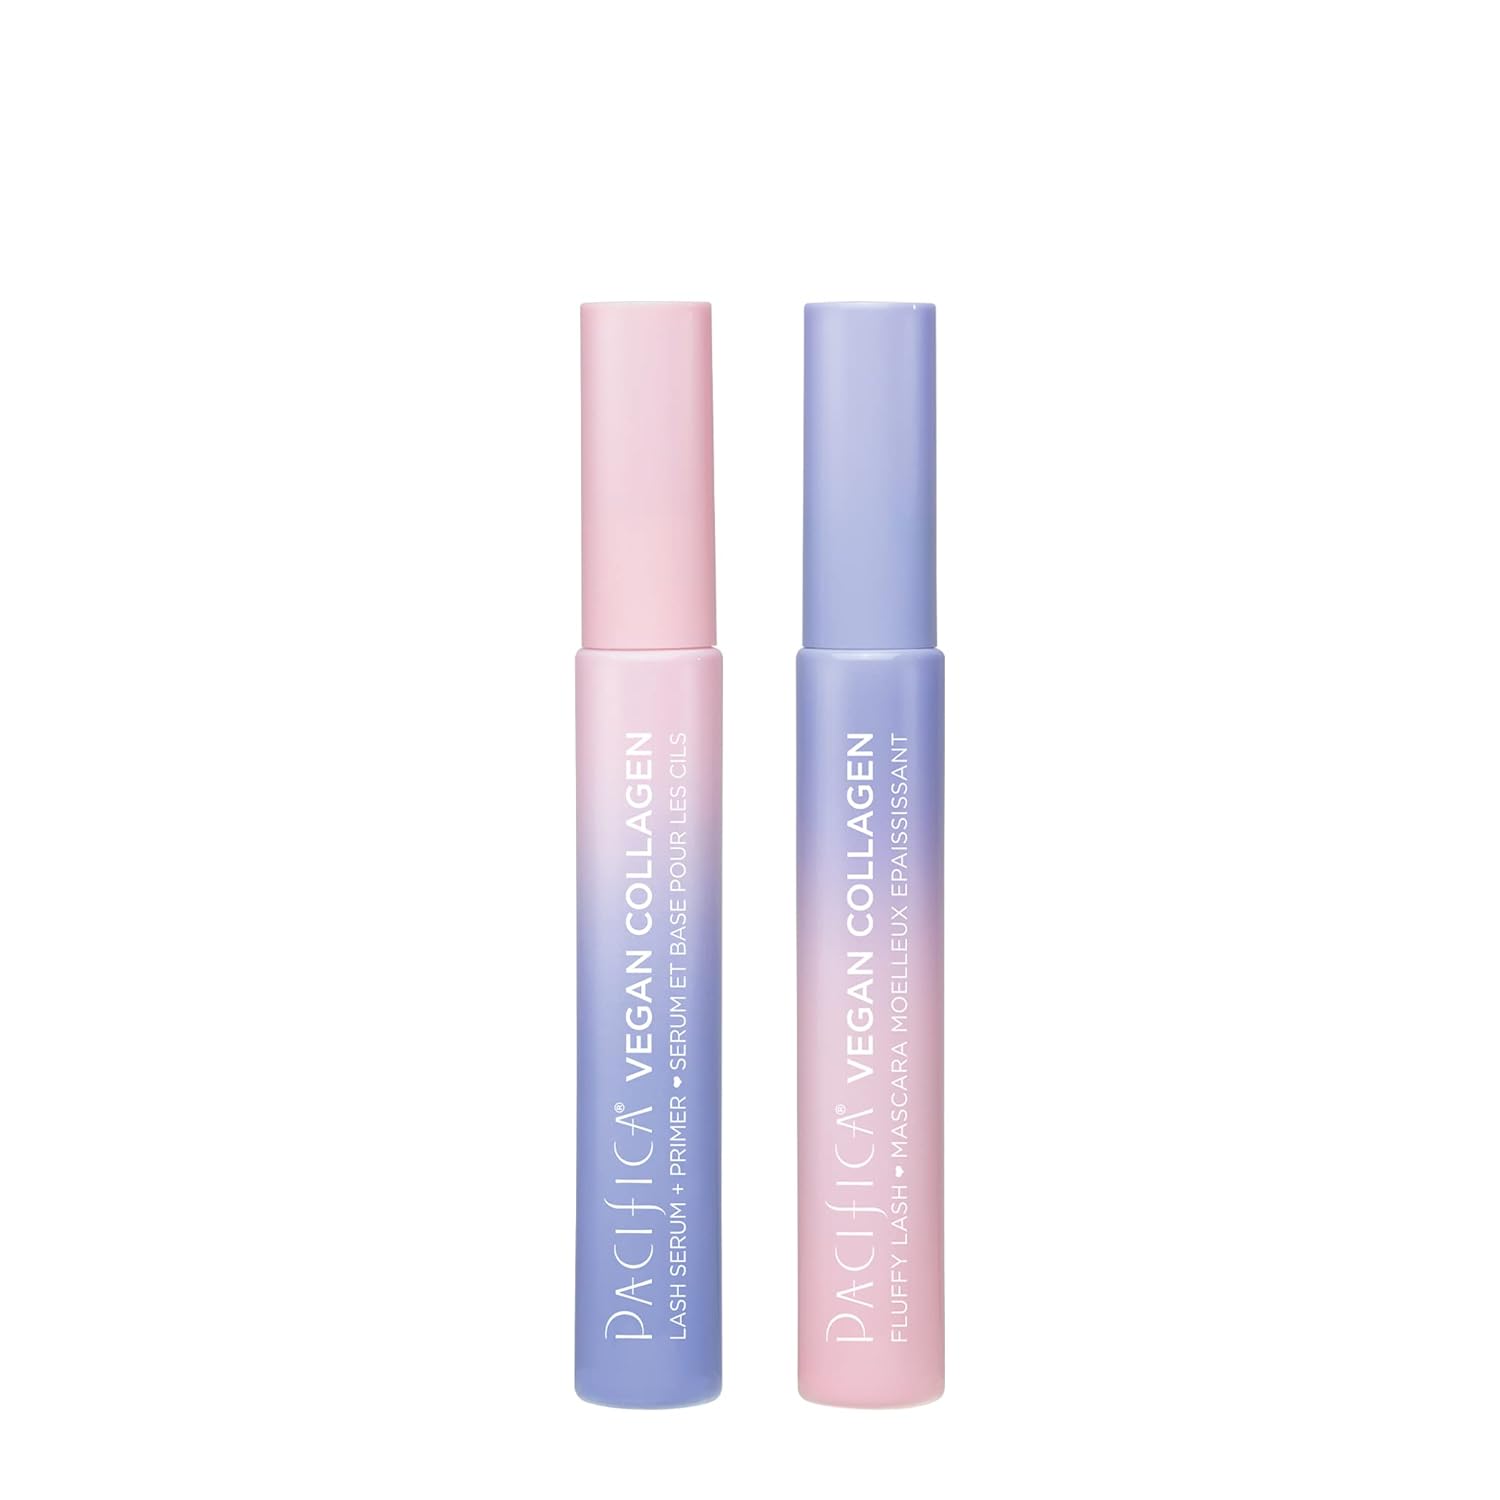 Pacifica Beauty, Vegan Collagen Fluffy Lash Duo, Black Mascara for Volume and Length + Conditioning Lash Serum & Primer, Feathery Full Fashes, Cruelty Free, Pack of 2 : Beauty & Personal Care